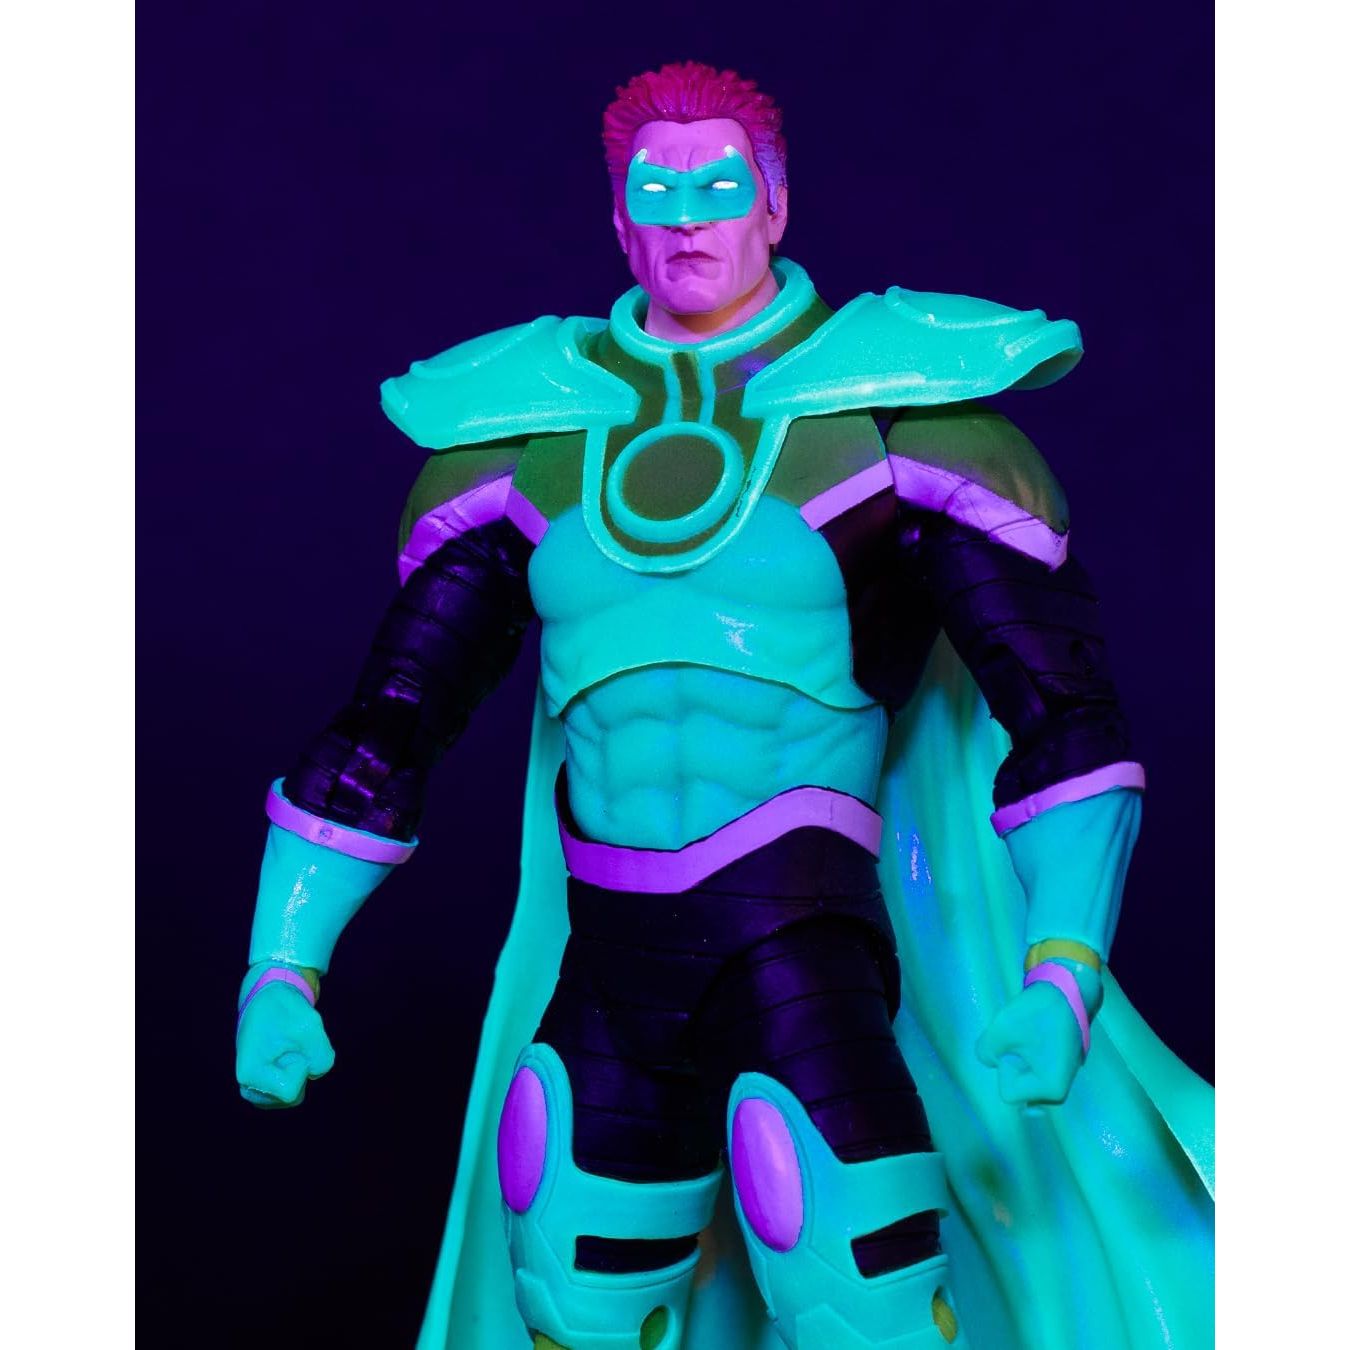 DC Multiverse Parallax (Green Lantern) Glow in The Dark Edition, 7in Action Figure, Gold Label